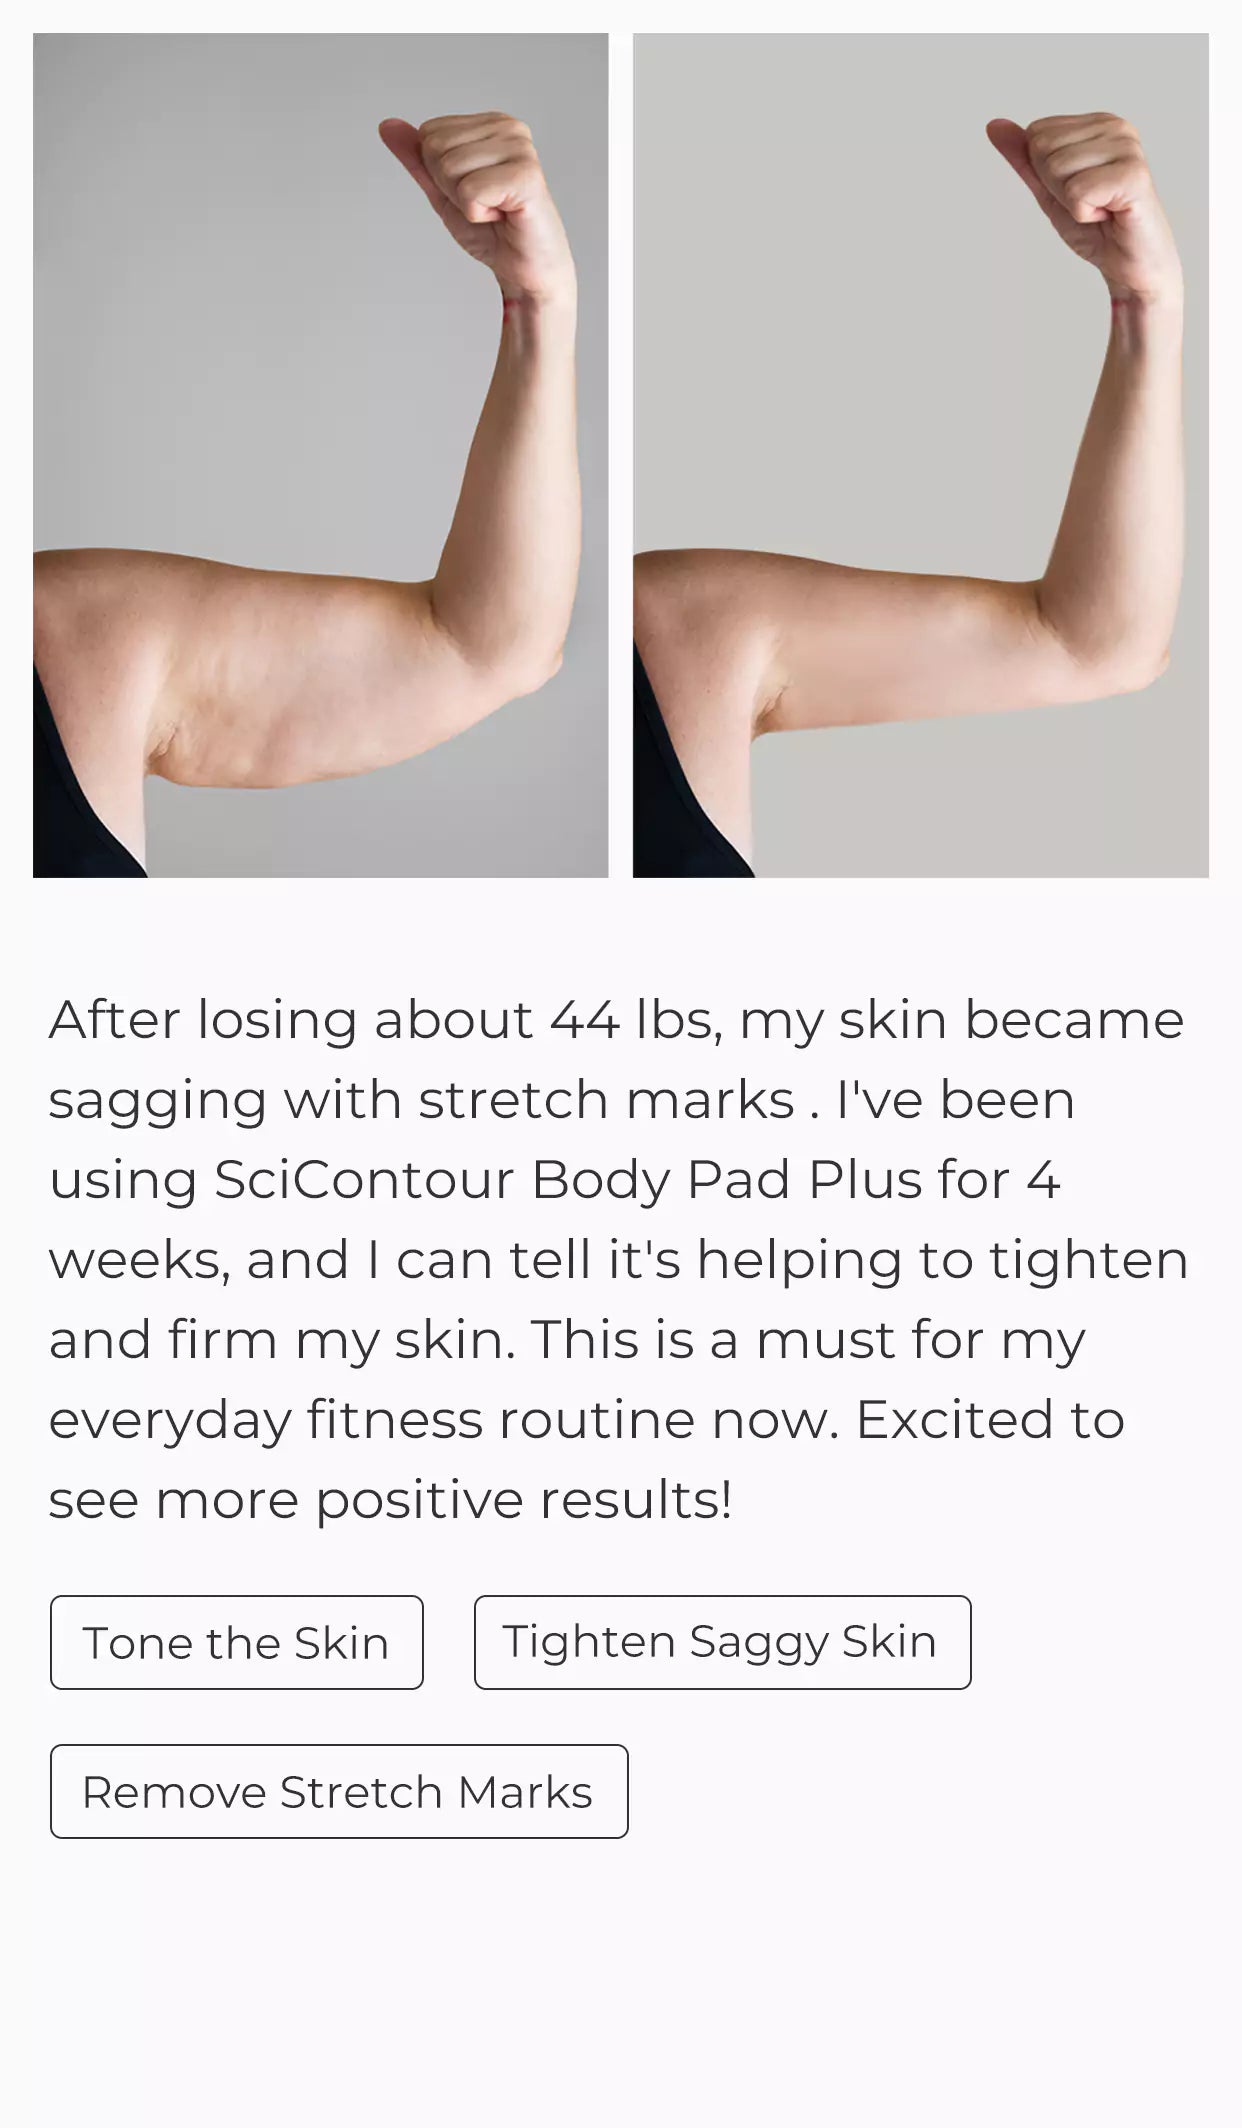 SciContour Body Pad Plus customer review-tighten and firm my skin